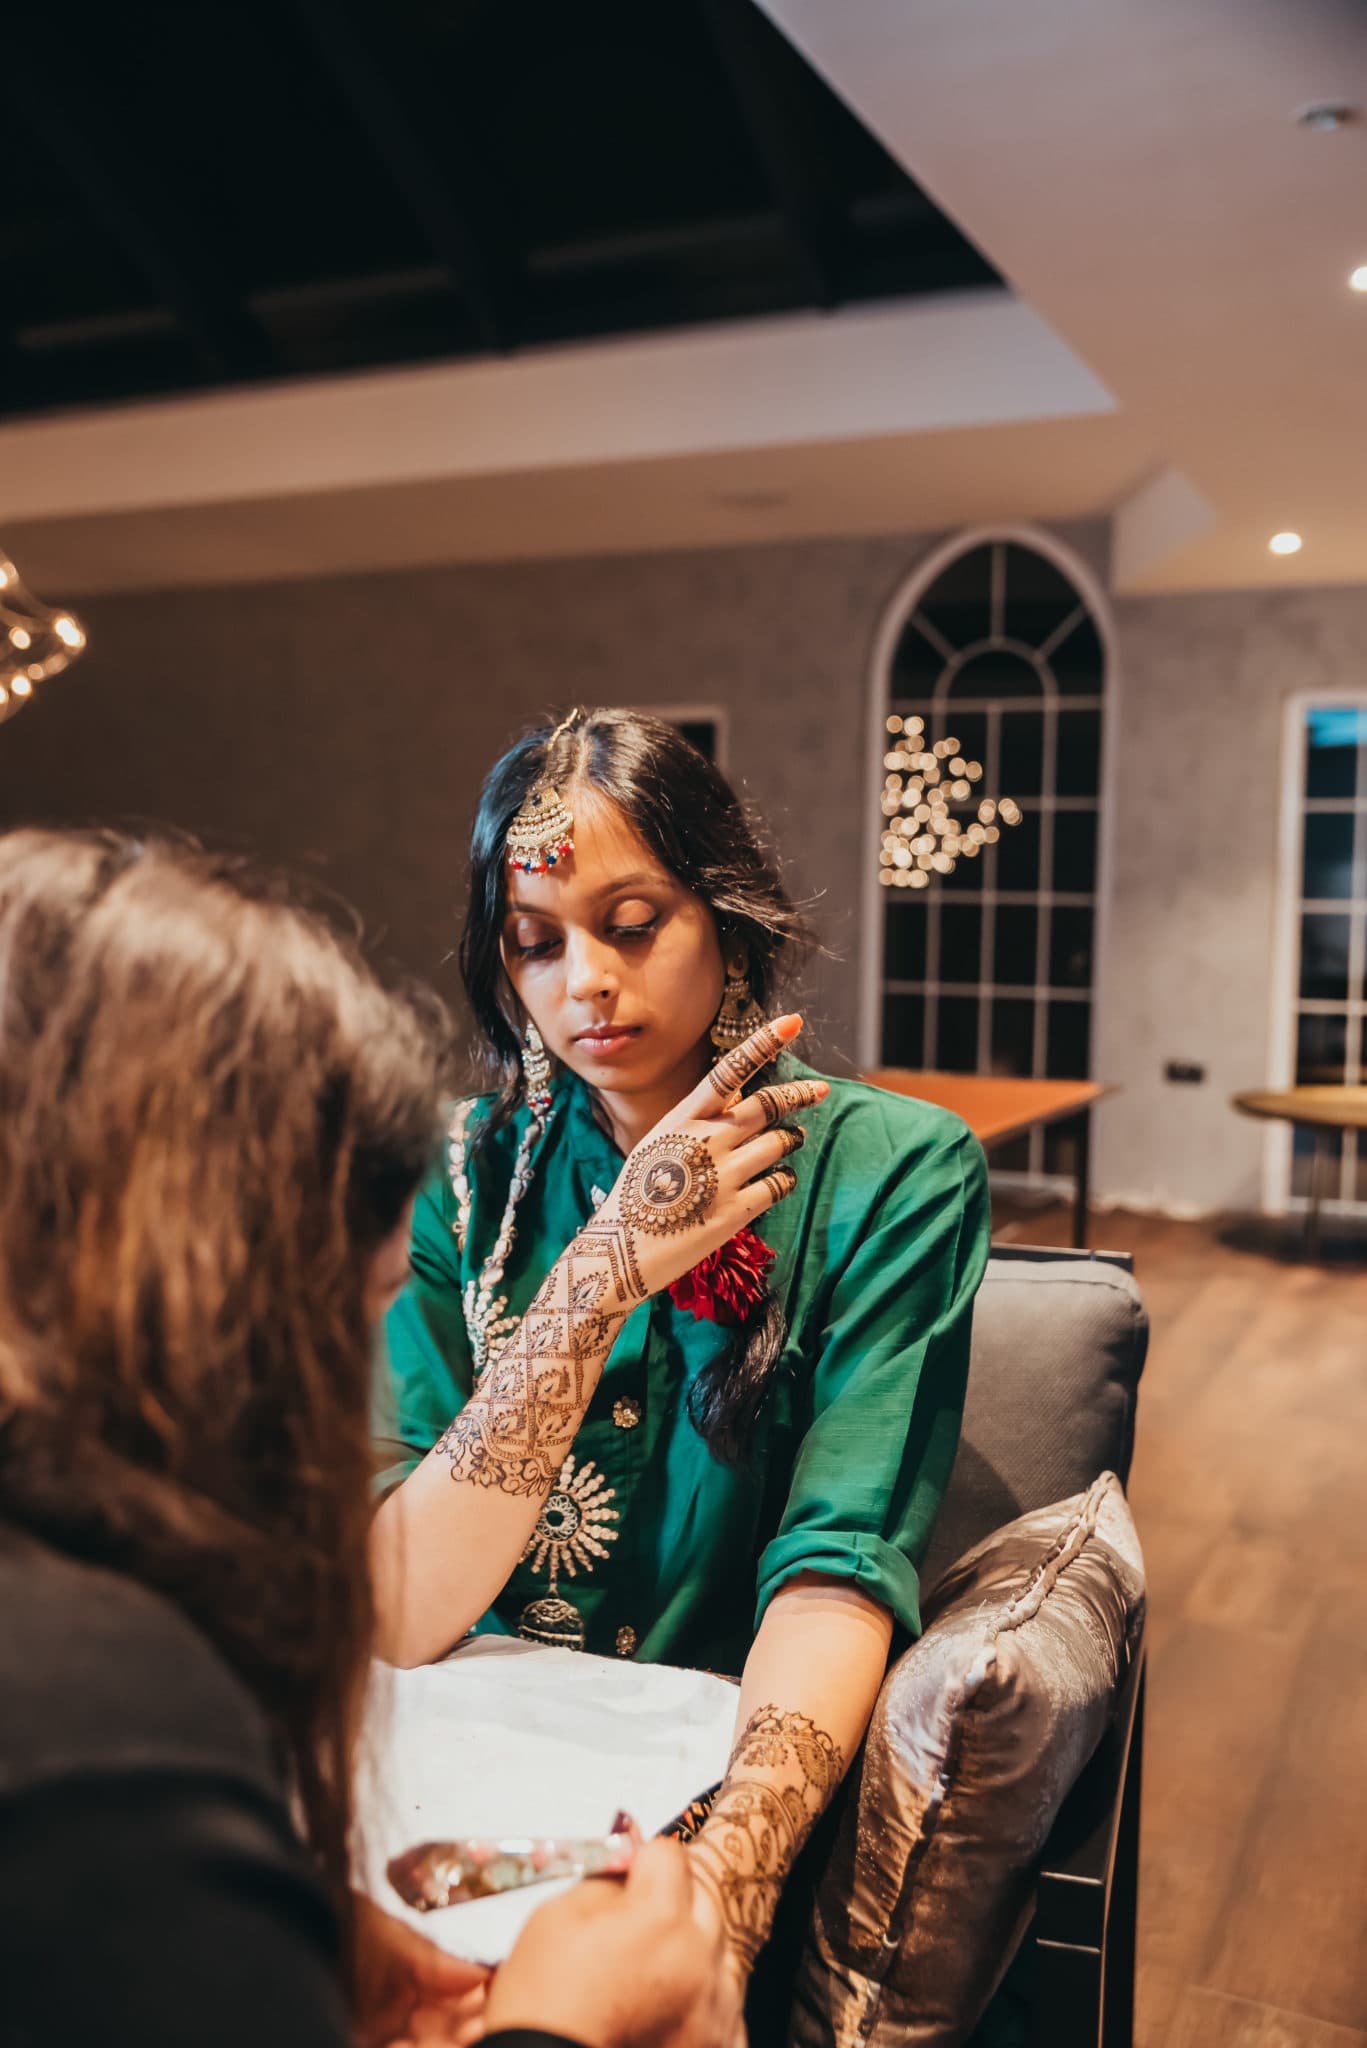 Mehndi ceremony in an Indian wedding ceremony , Barnet, Potters Bar